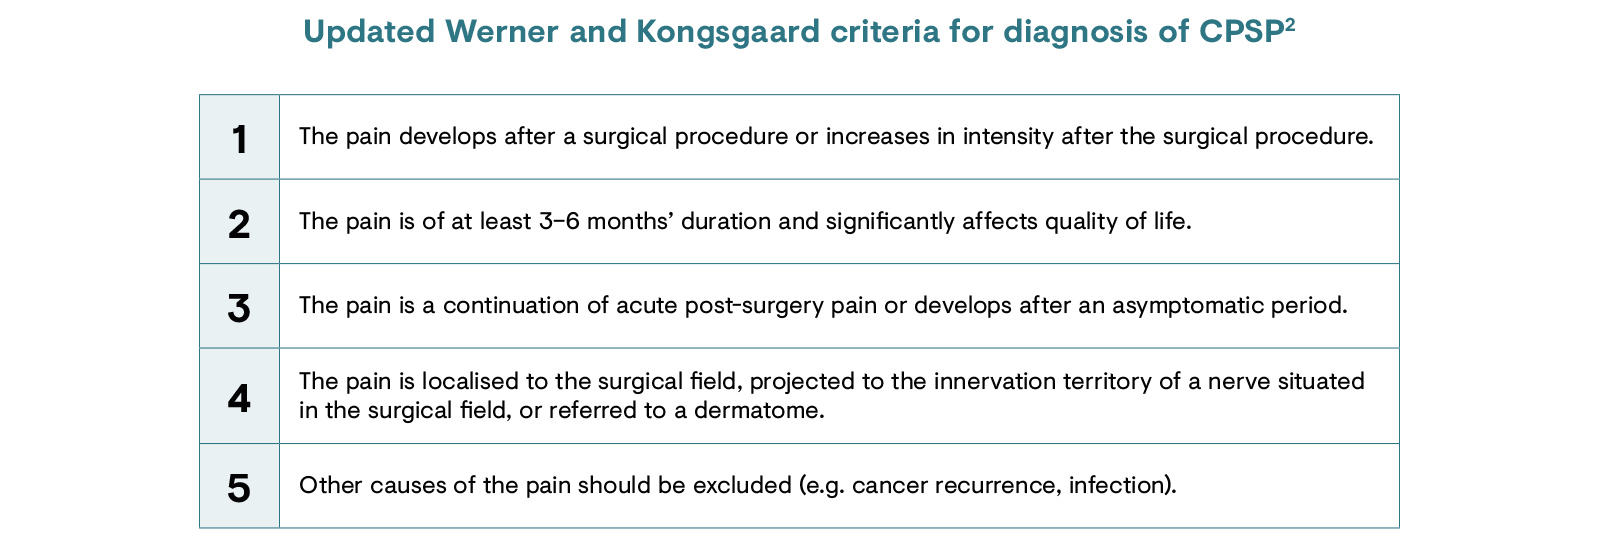 Updated Werner and Kongsgaard criteria for diagnosis of chronic post surgical pain